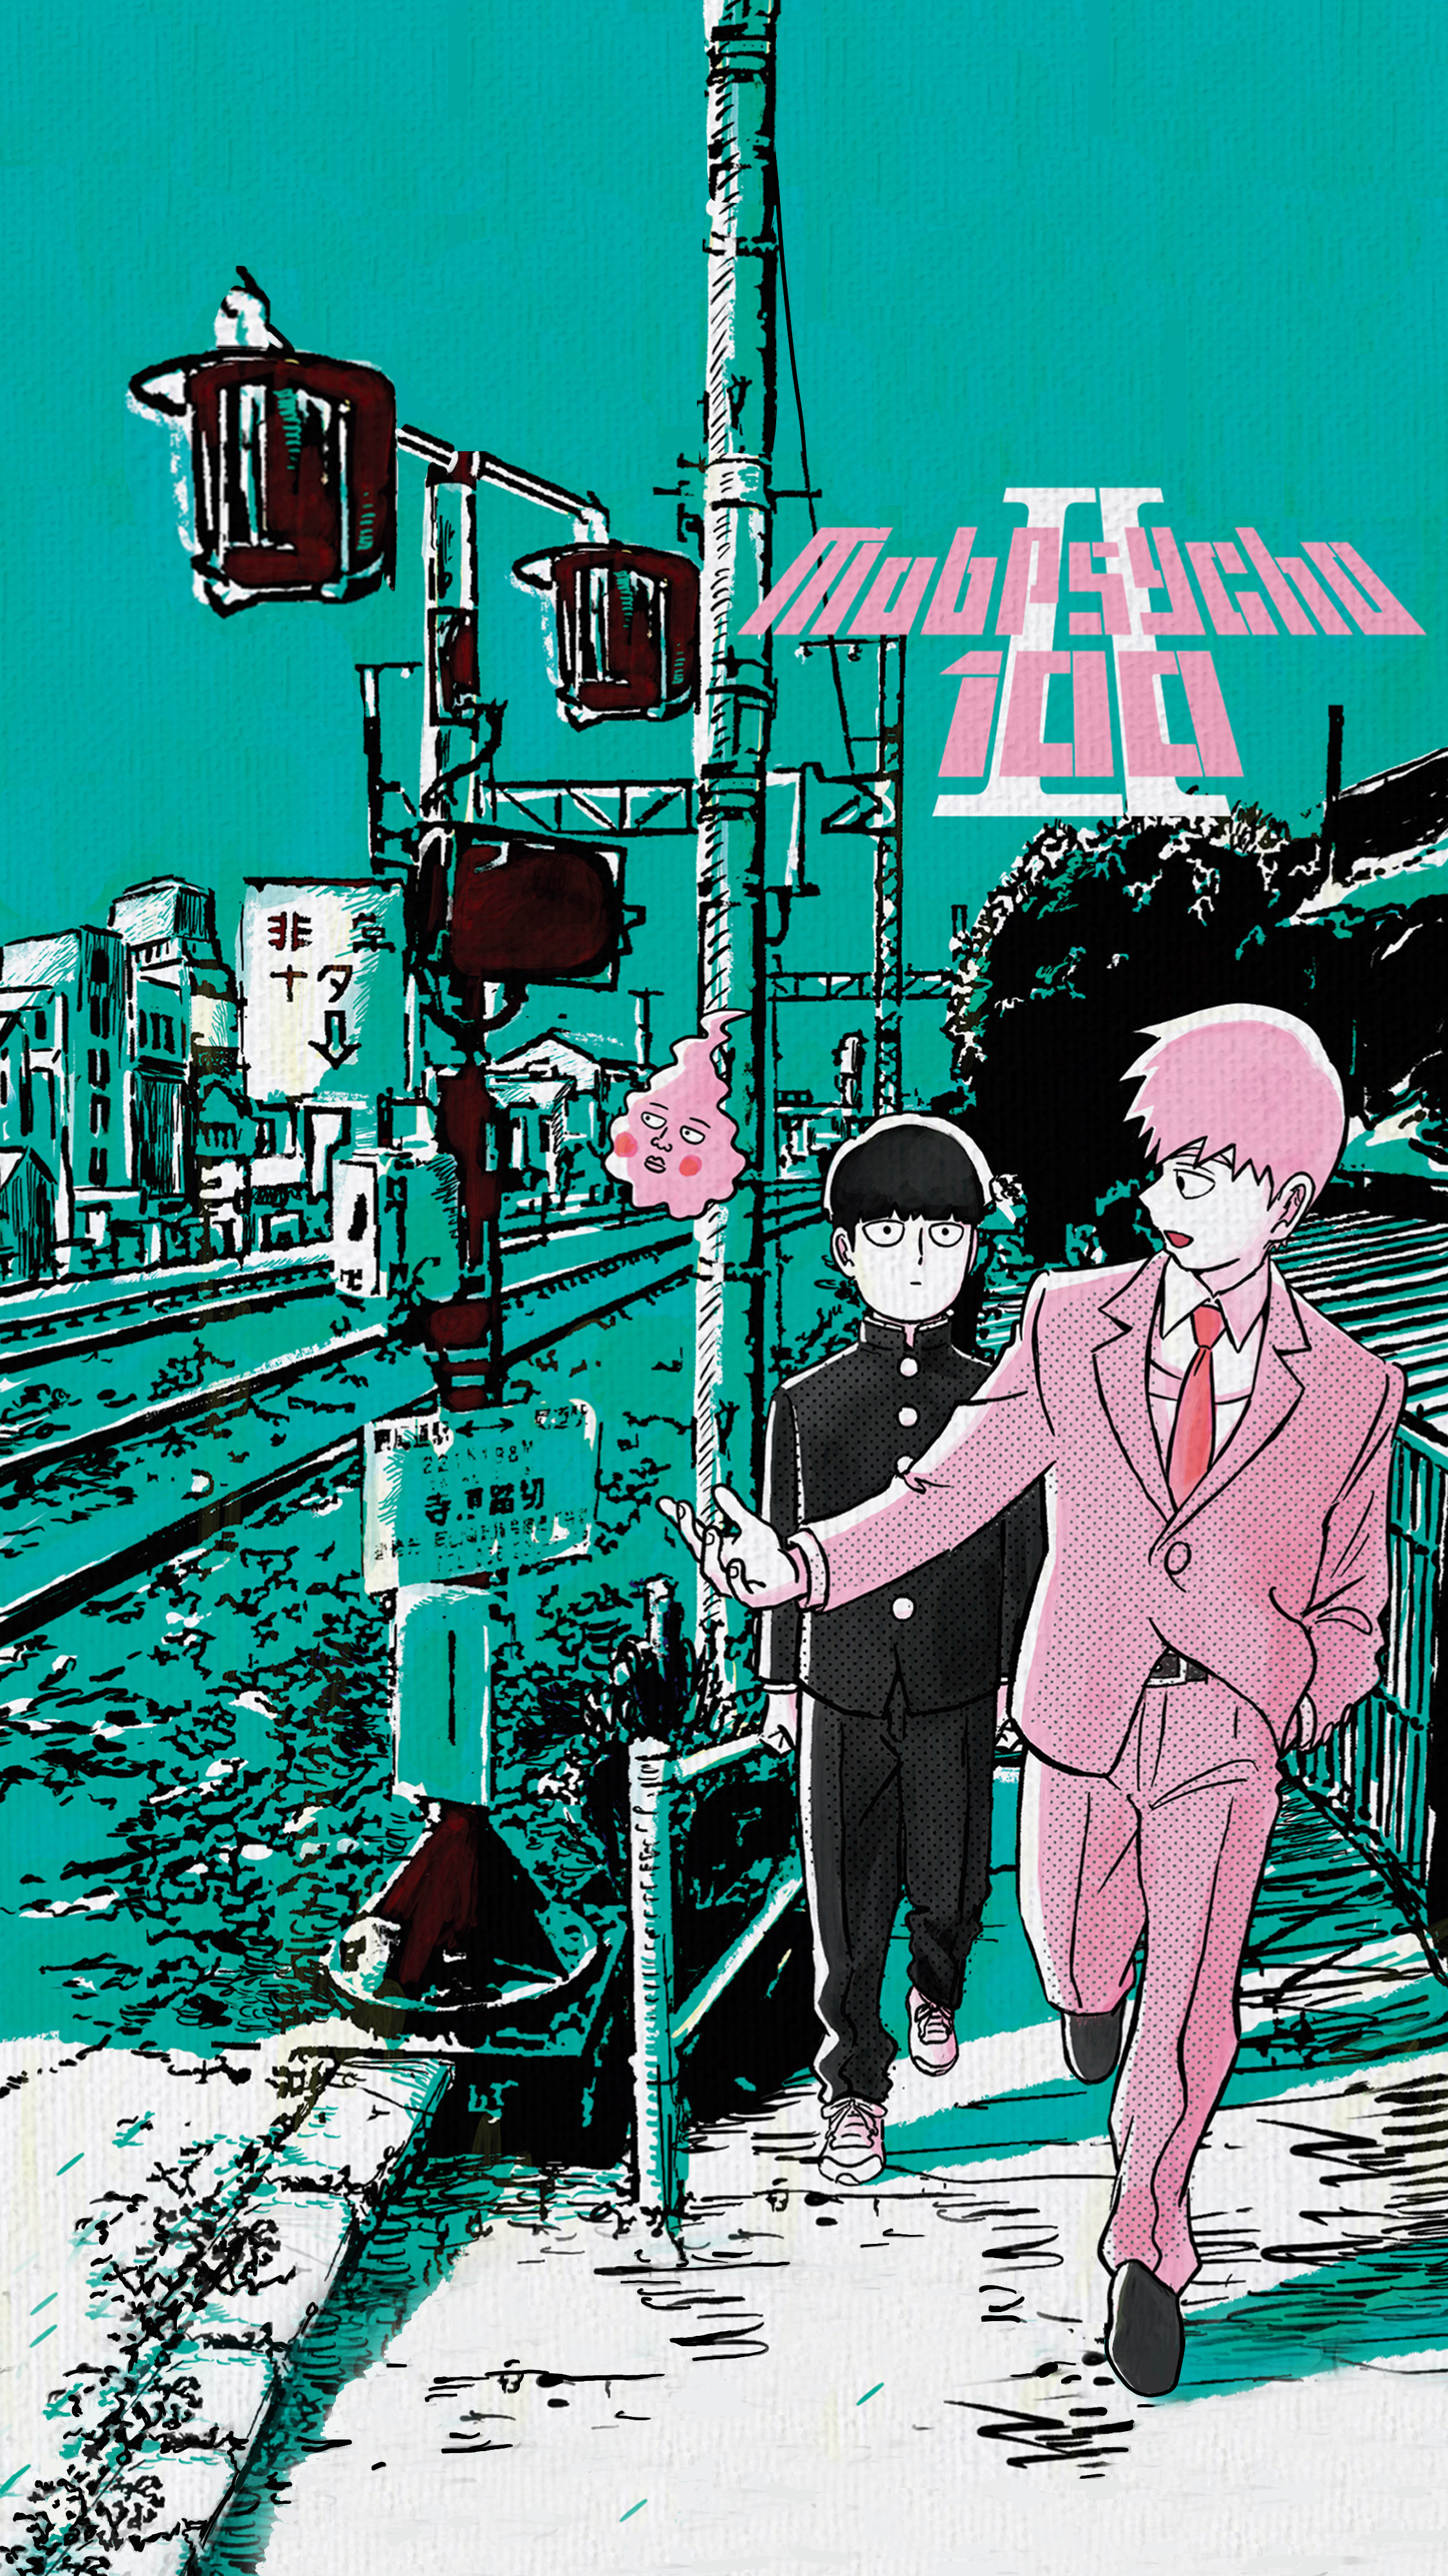 I made an iPhone wallpaper from the MP100 II bluray art